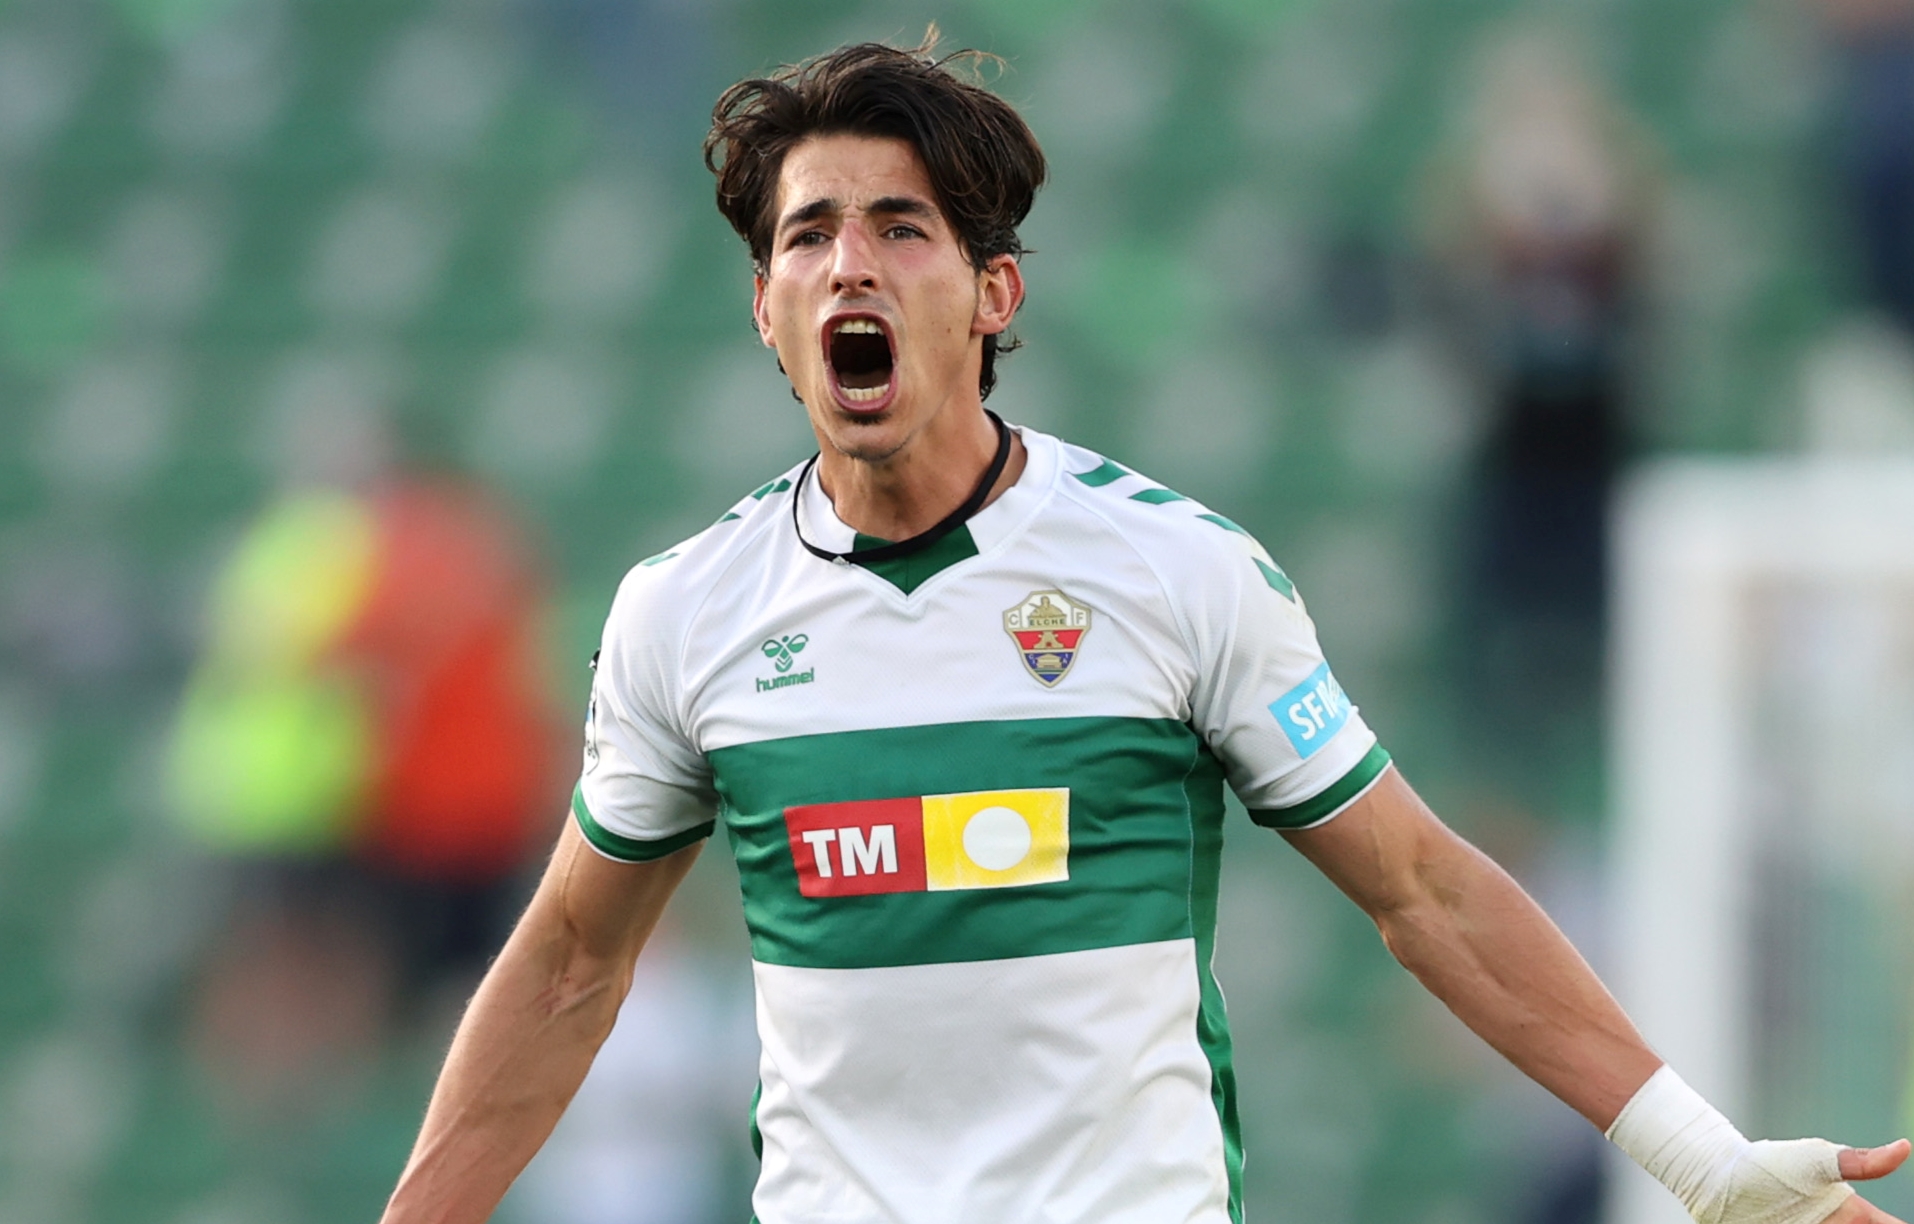 Elche continue improved form with key win over relegation rivals Alaves